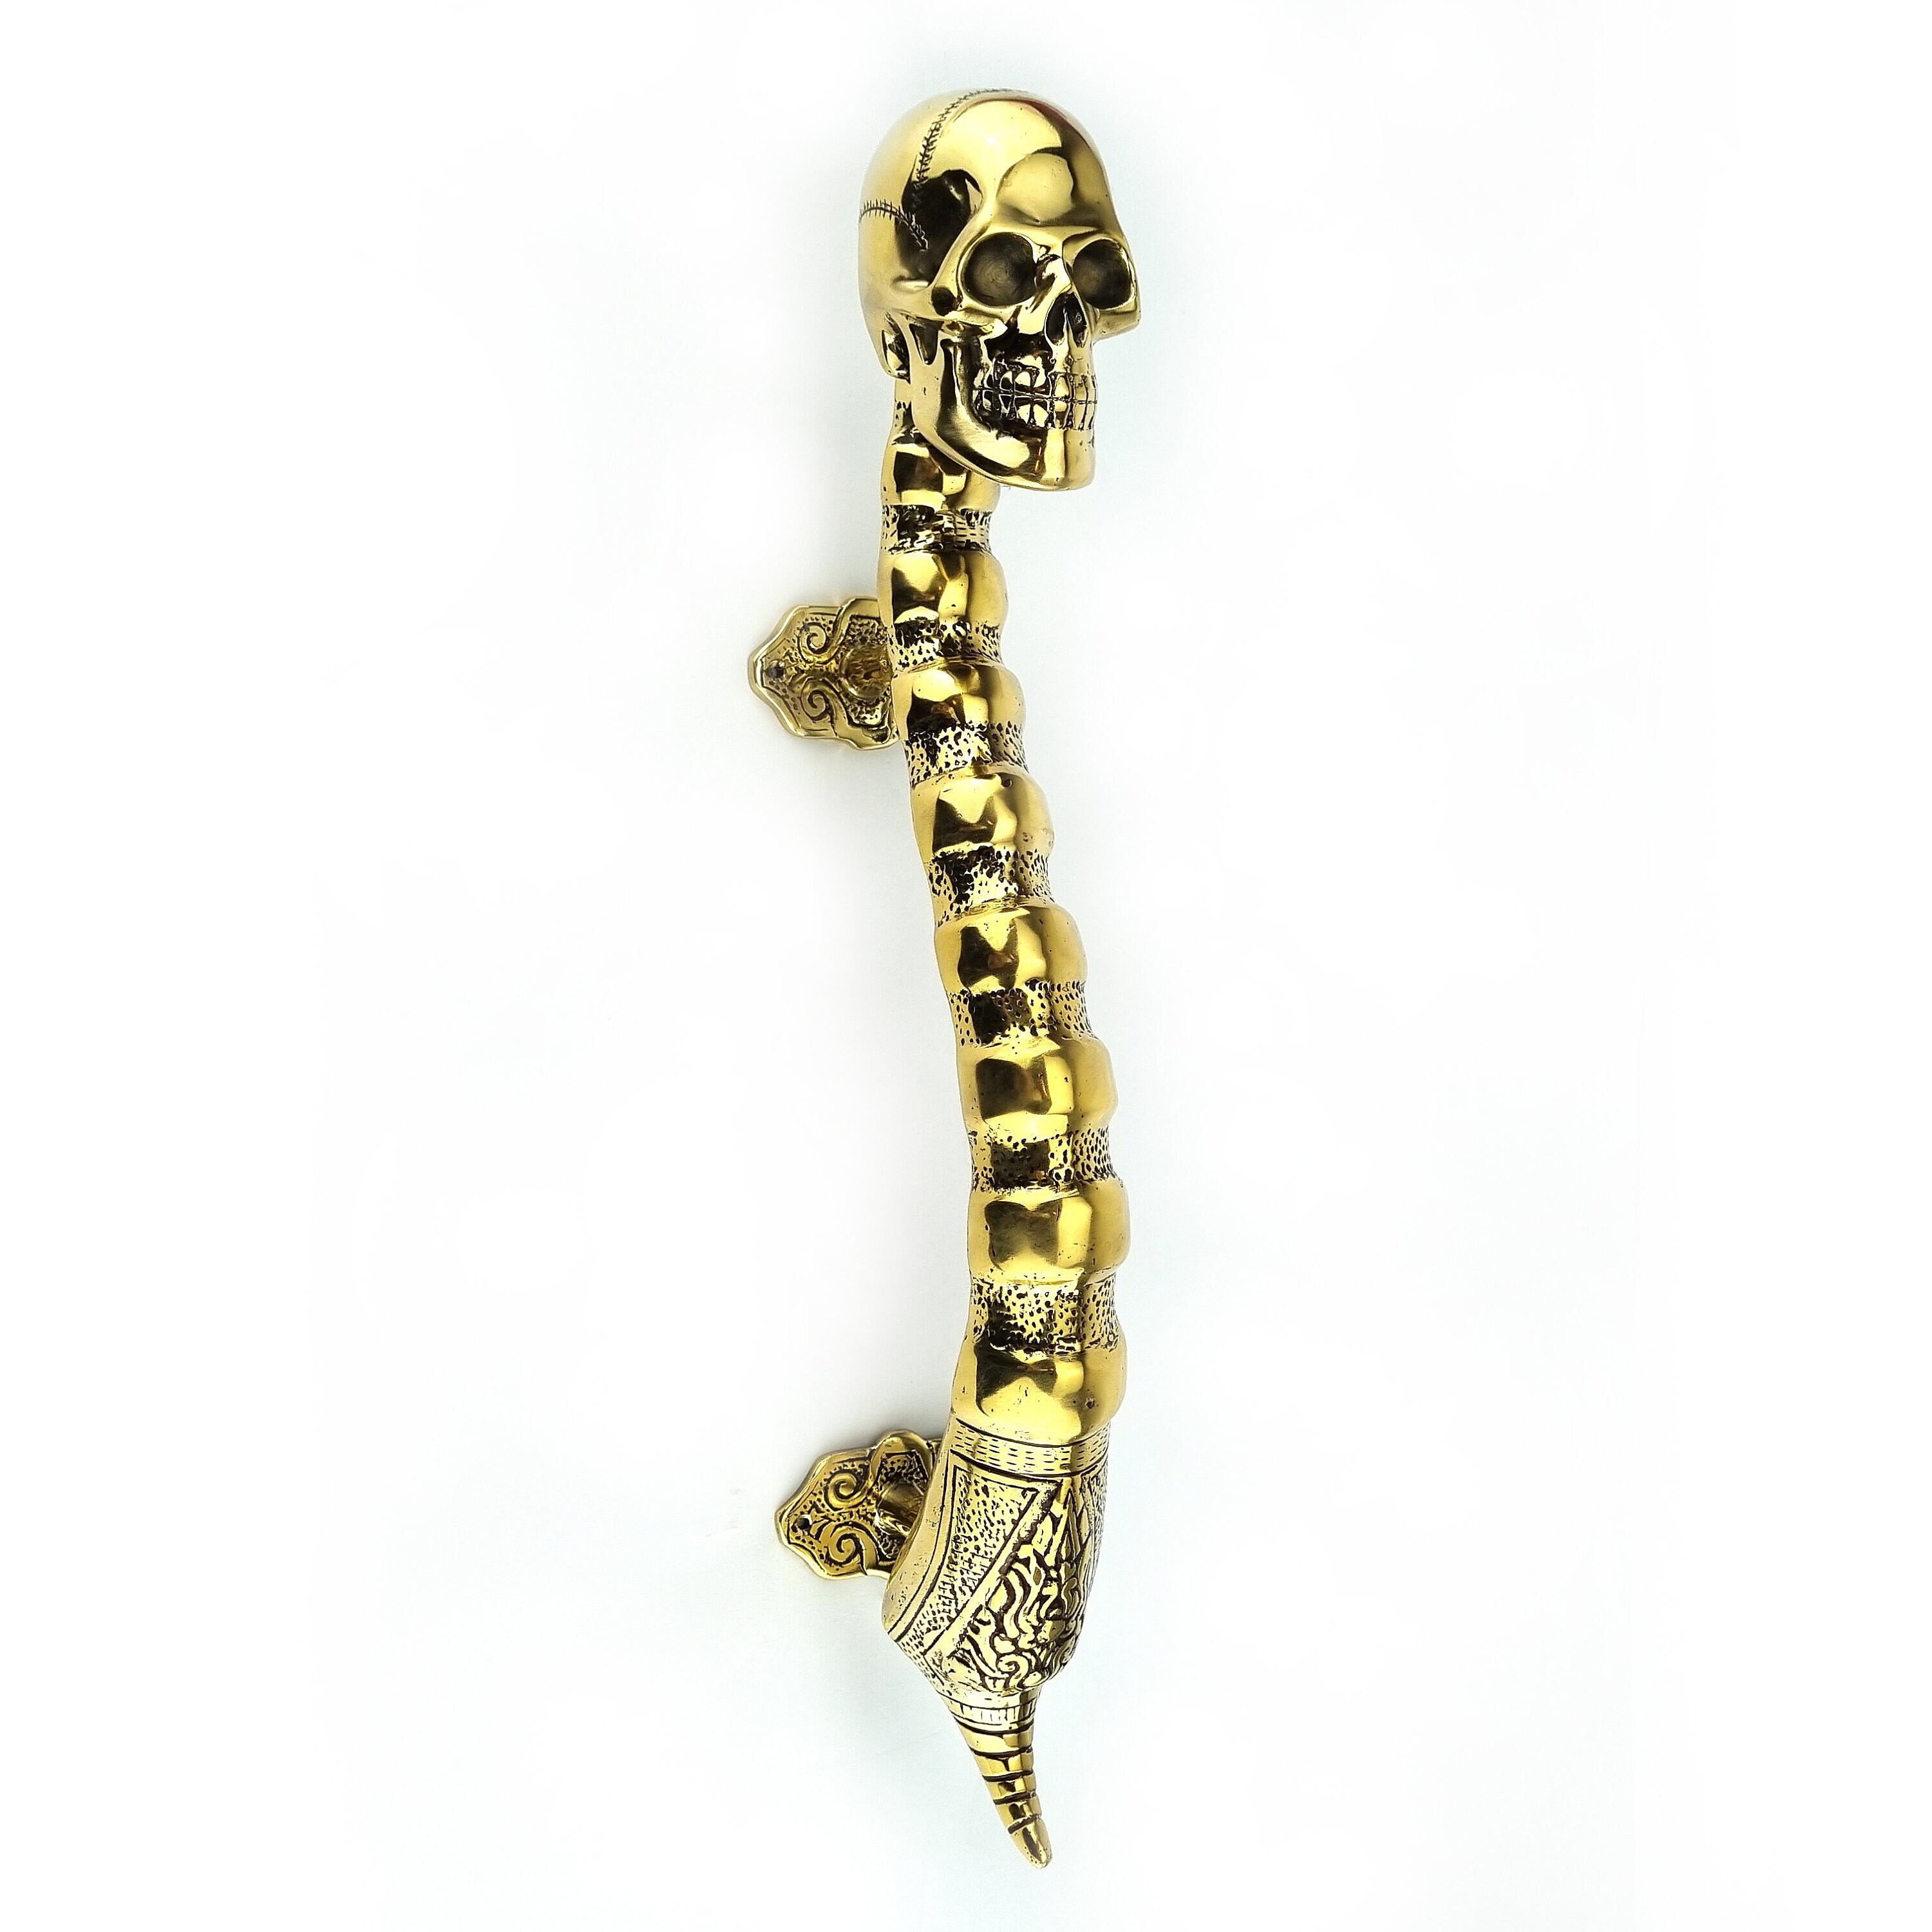 massive SKULL handle door pull spine solid pure brass old style 19" long heavy polished natural bronze brass patina